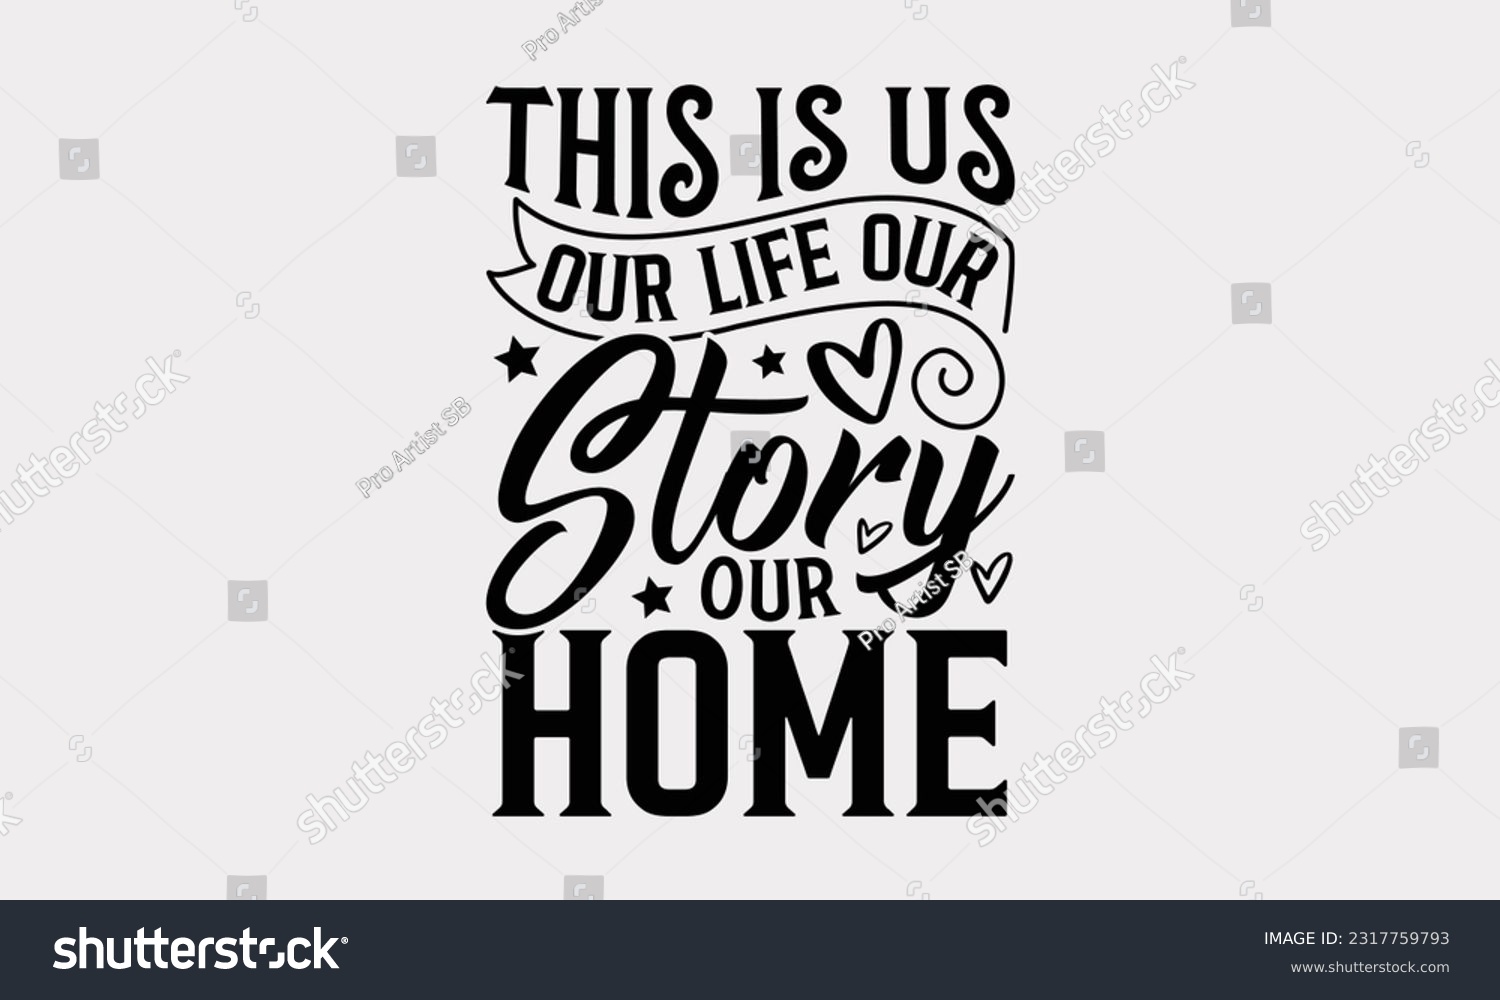 SVG of This Is Us Our Life Our Story Our Home - Family SVG Design, Hand Lettering Phrase Isolated On White Background, Modern Calligraphy Vector, SVG File For Cutting. svg